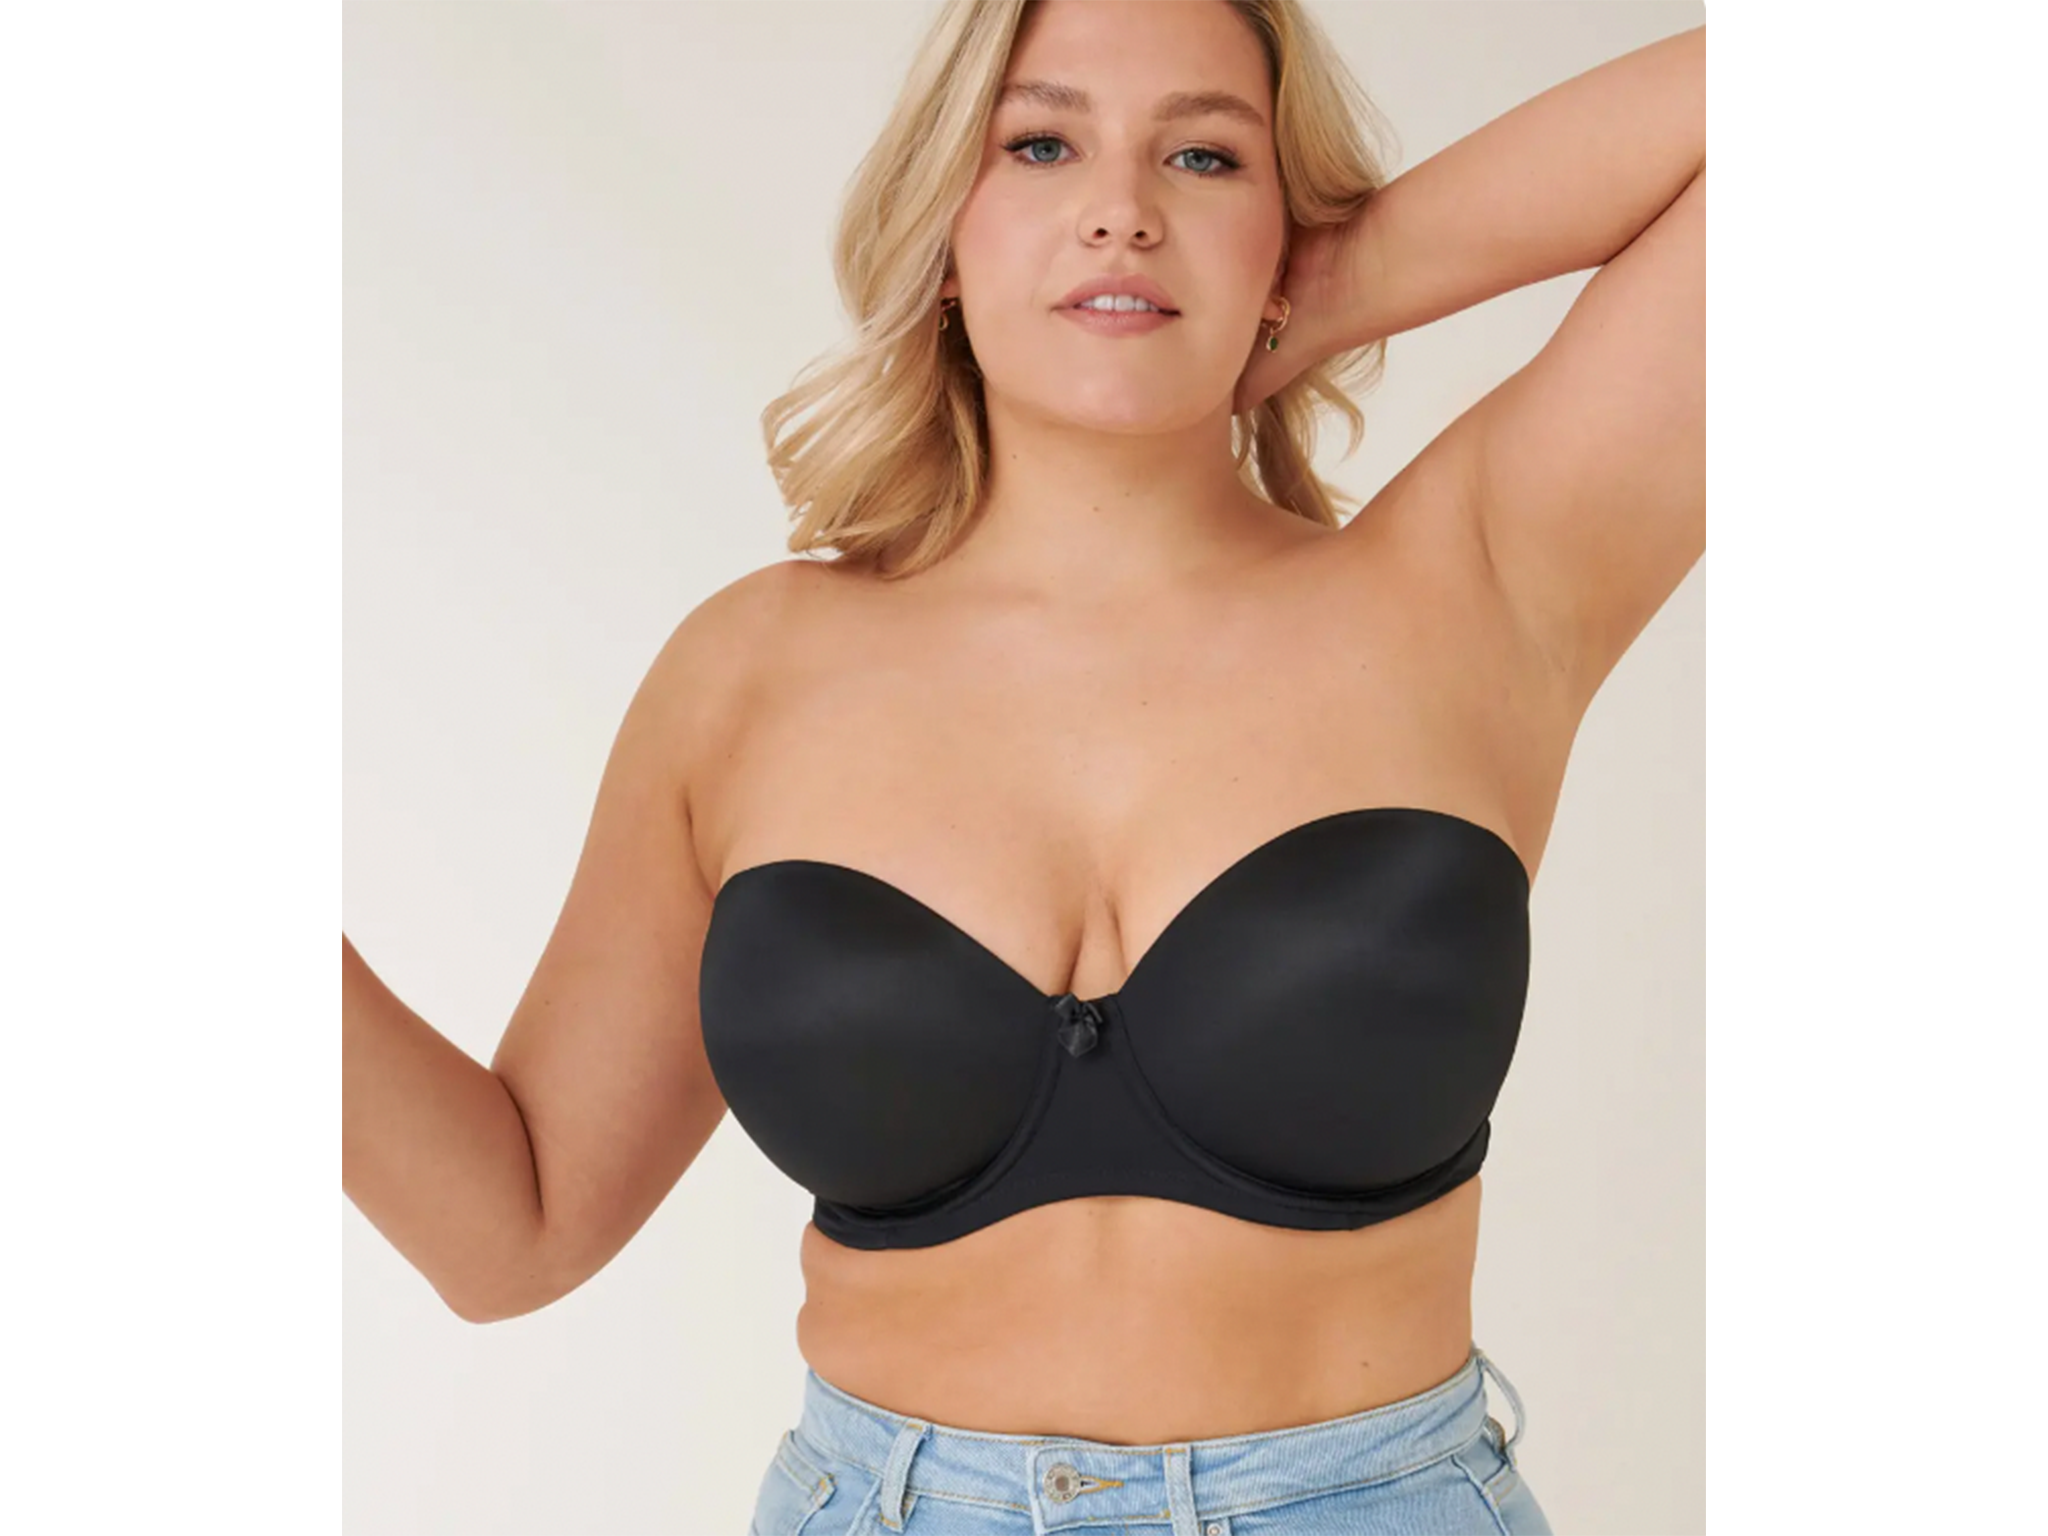 Pour Moi definitions strapless bra review